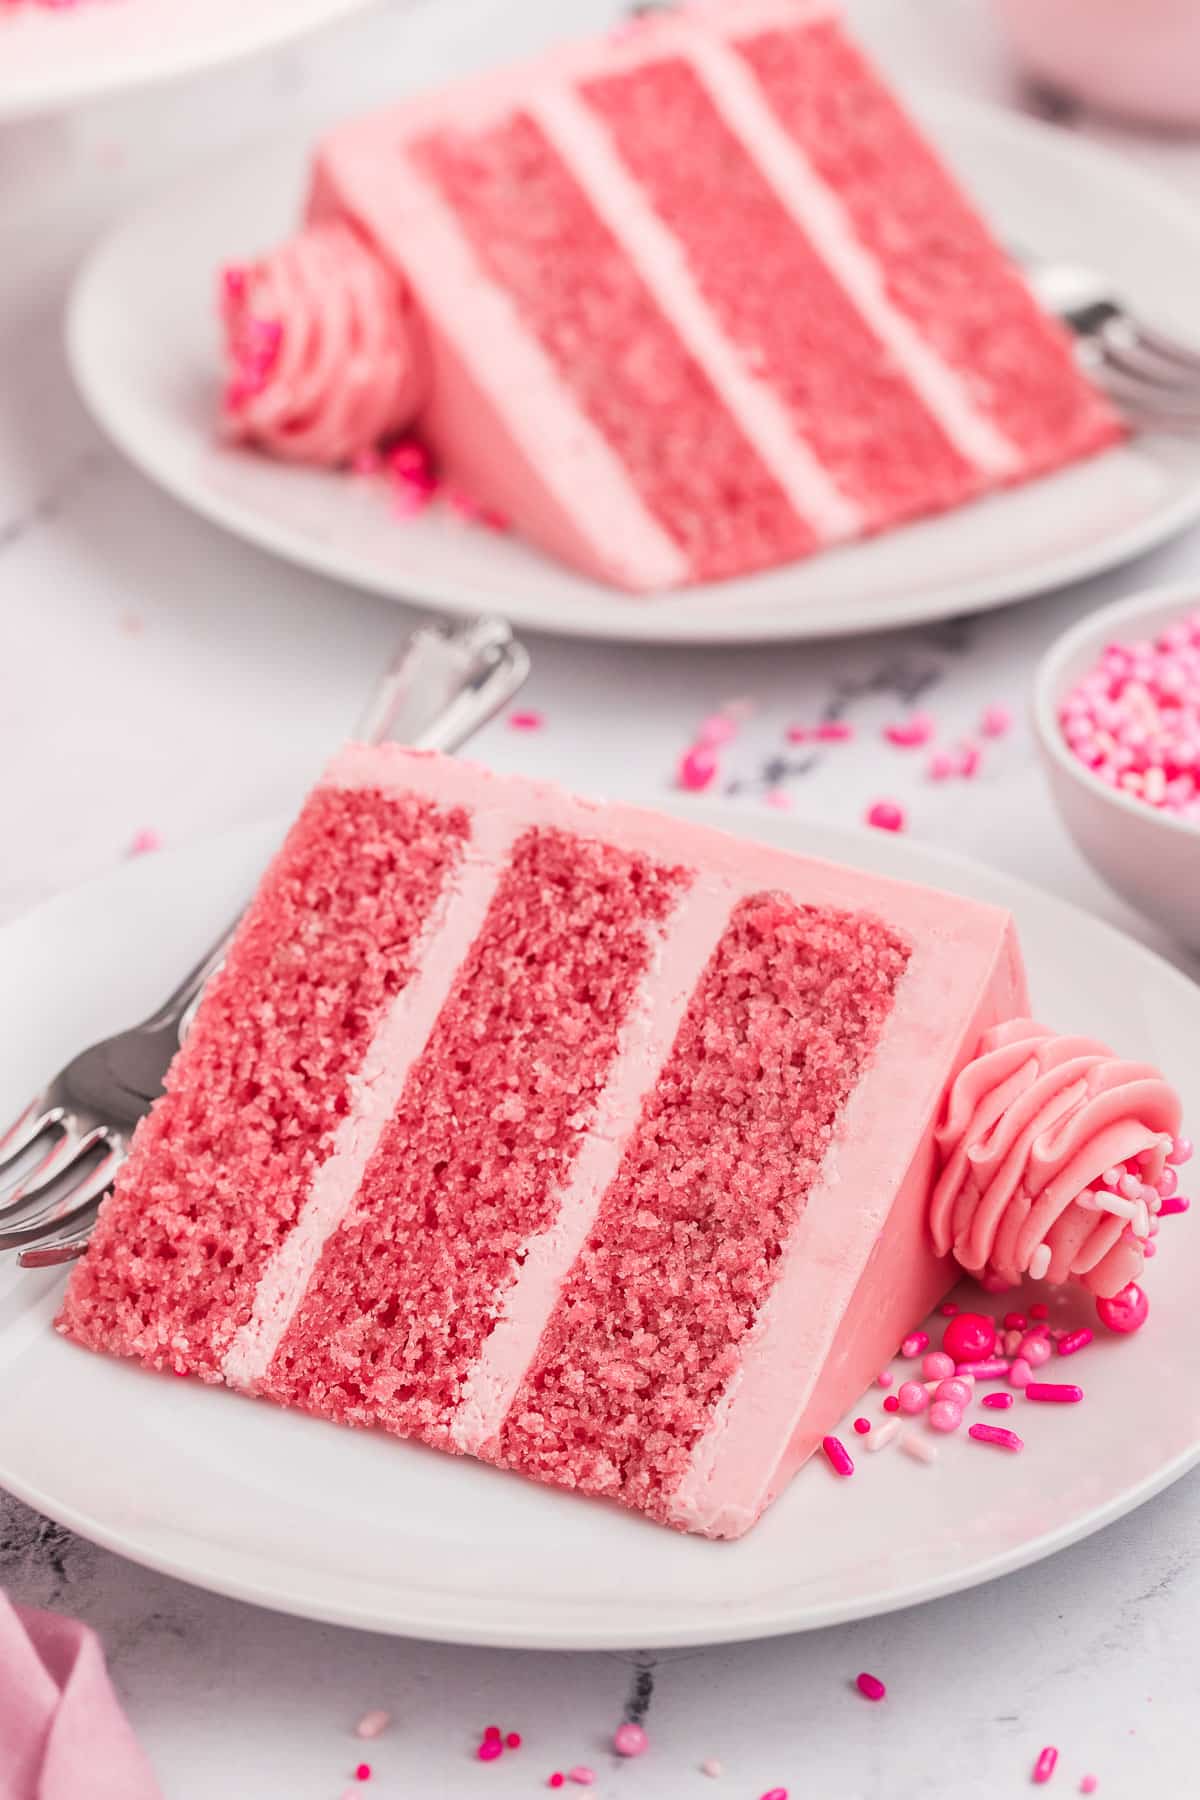 Slices of pink cake on plates with sprinkles on top.